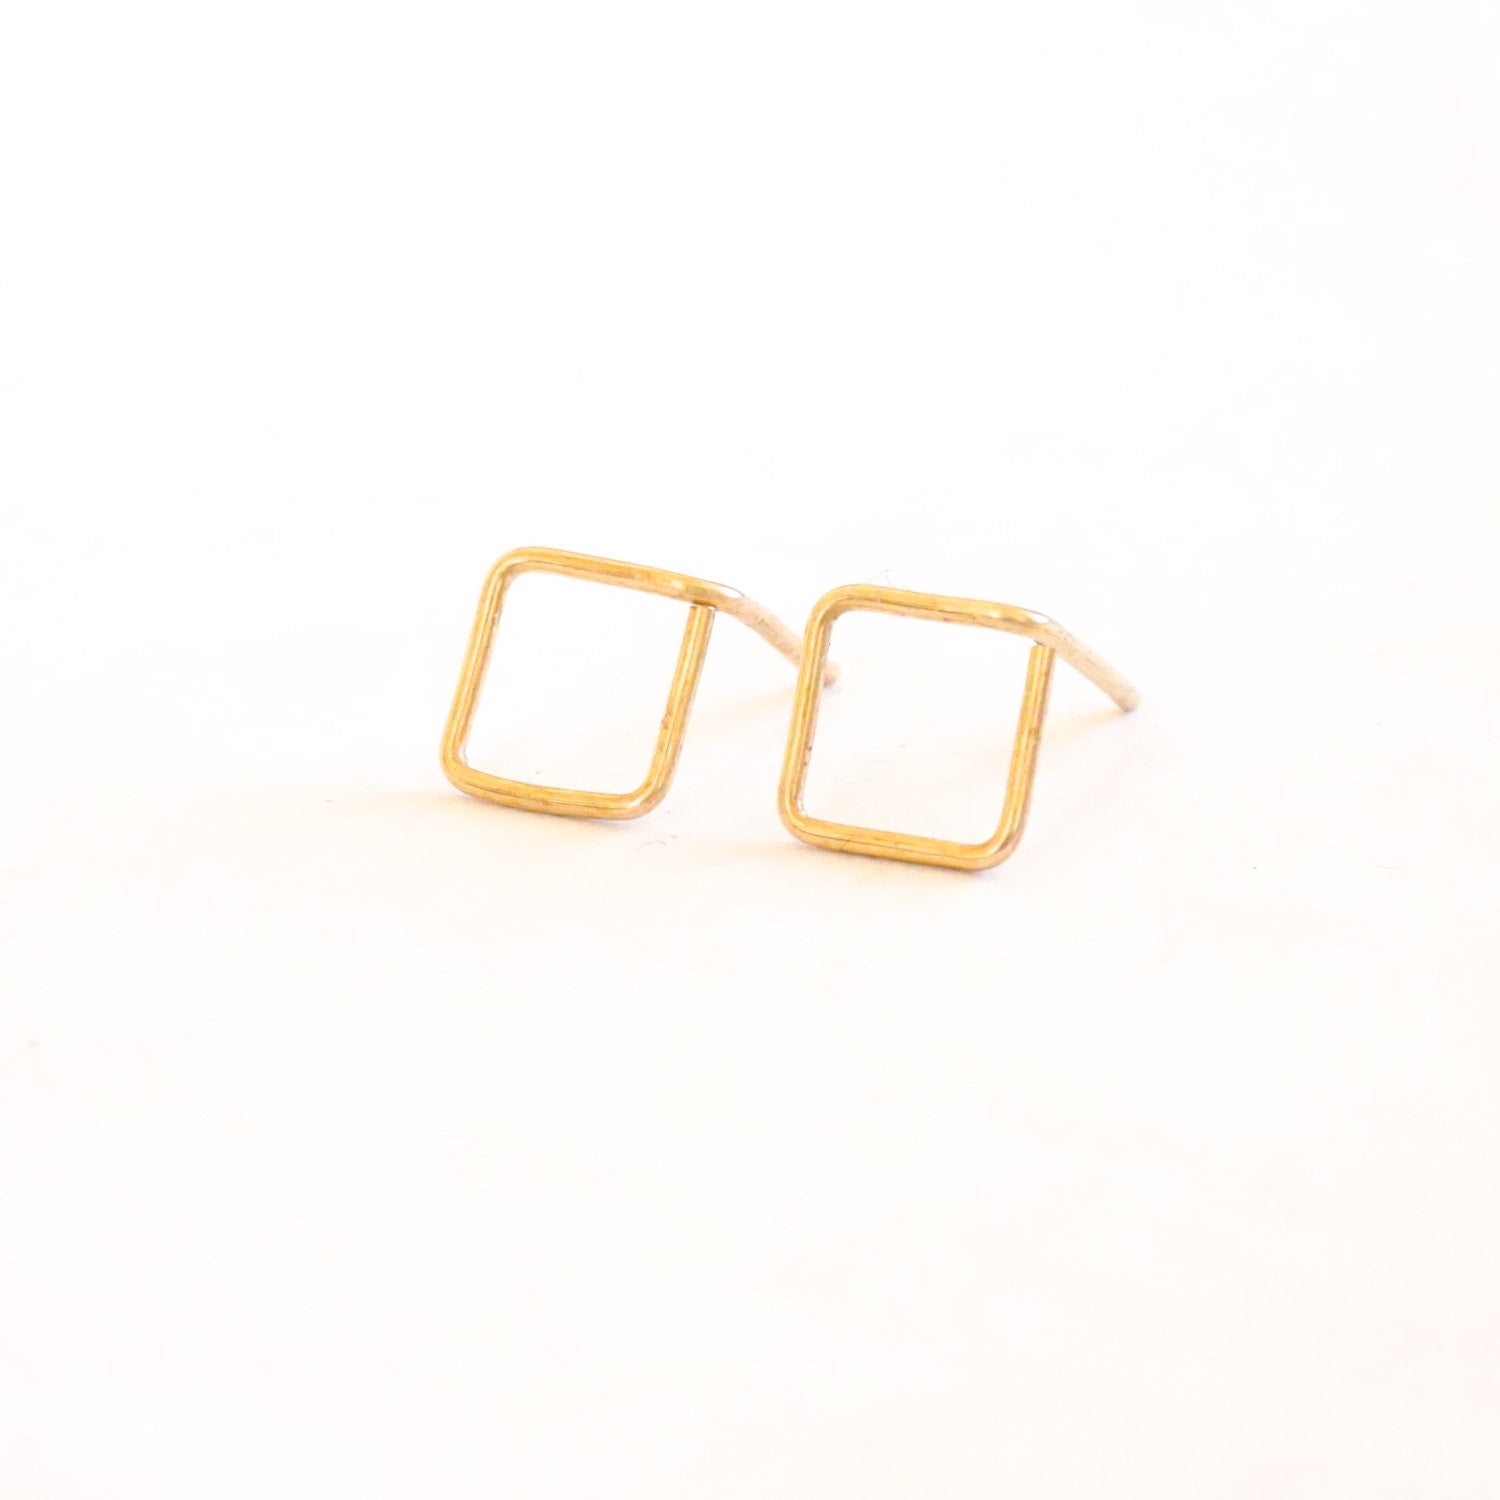 8mm Open Square Stud Earrings 013 - Patination Design